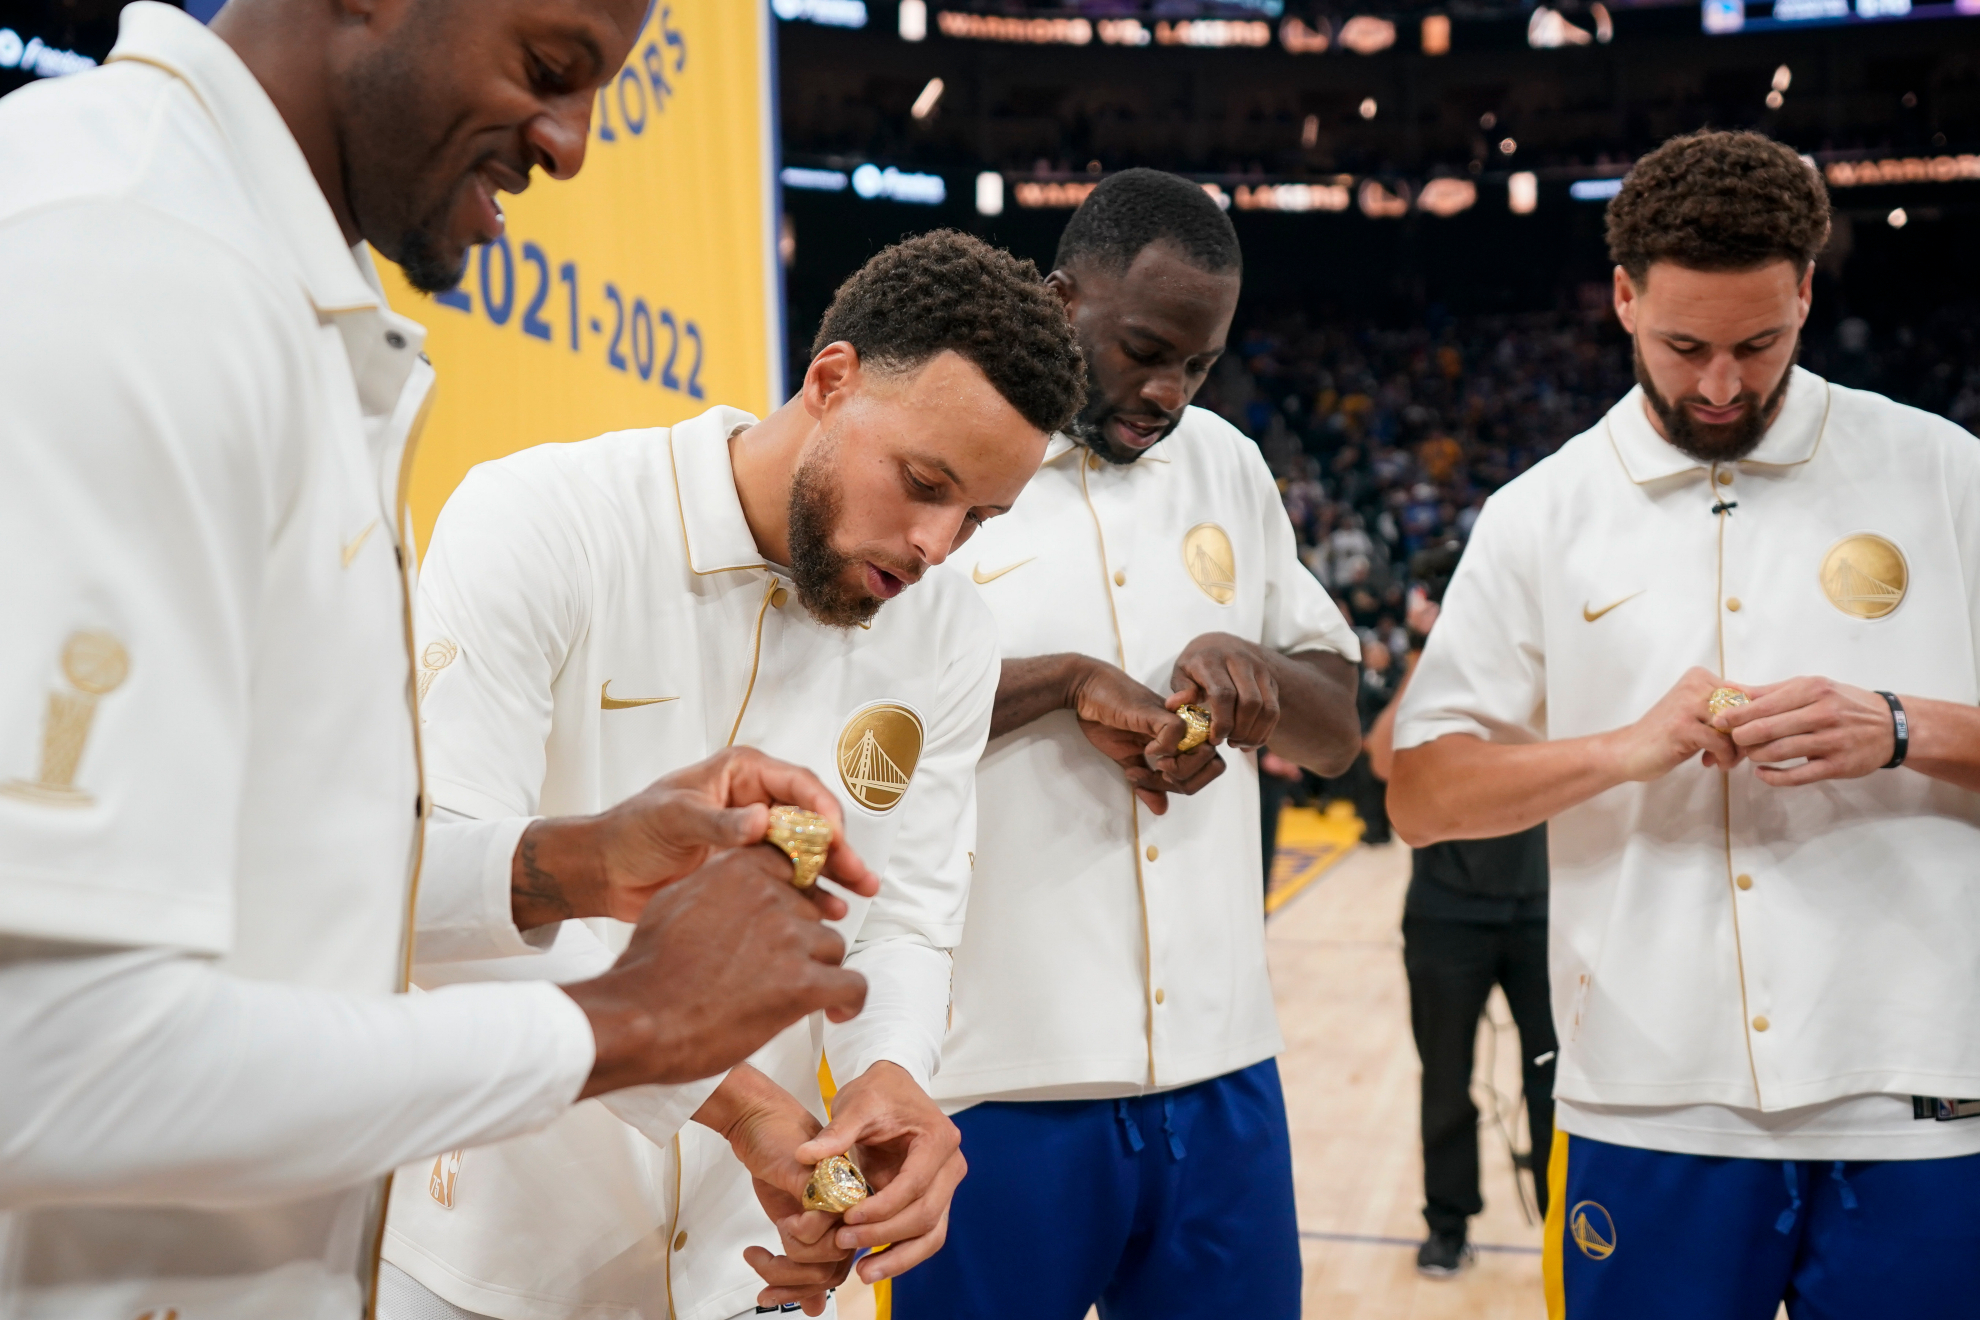 The Golden State Warriors Championship ring and banner ceremony. - AP